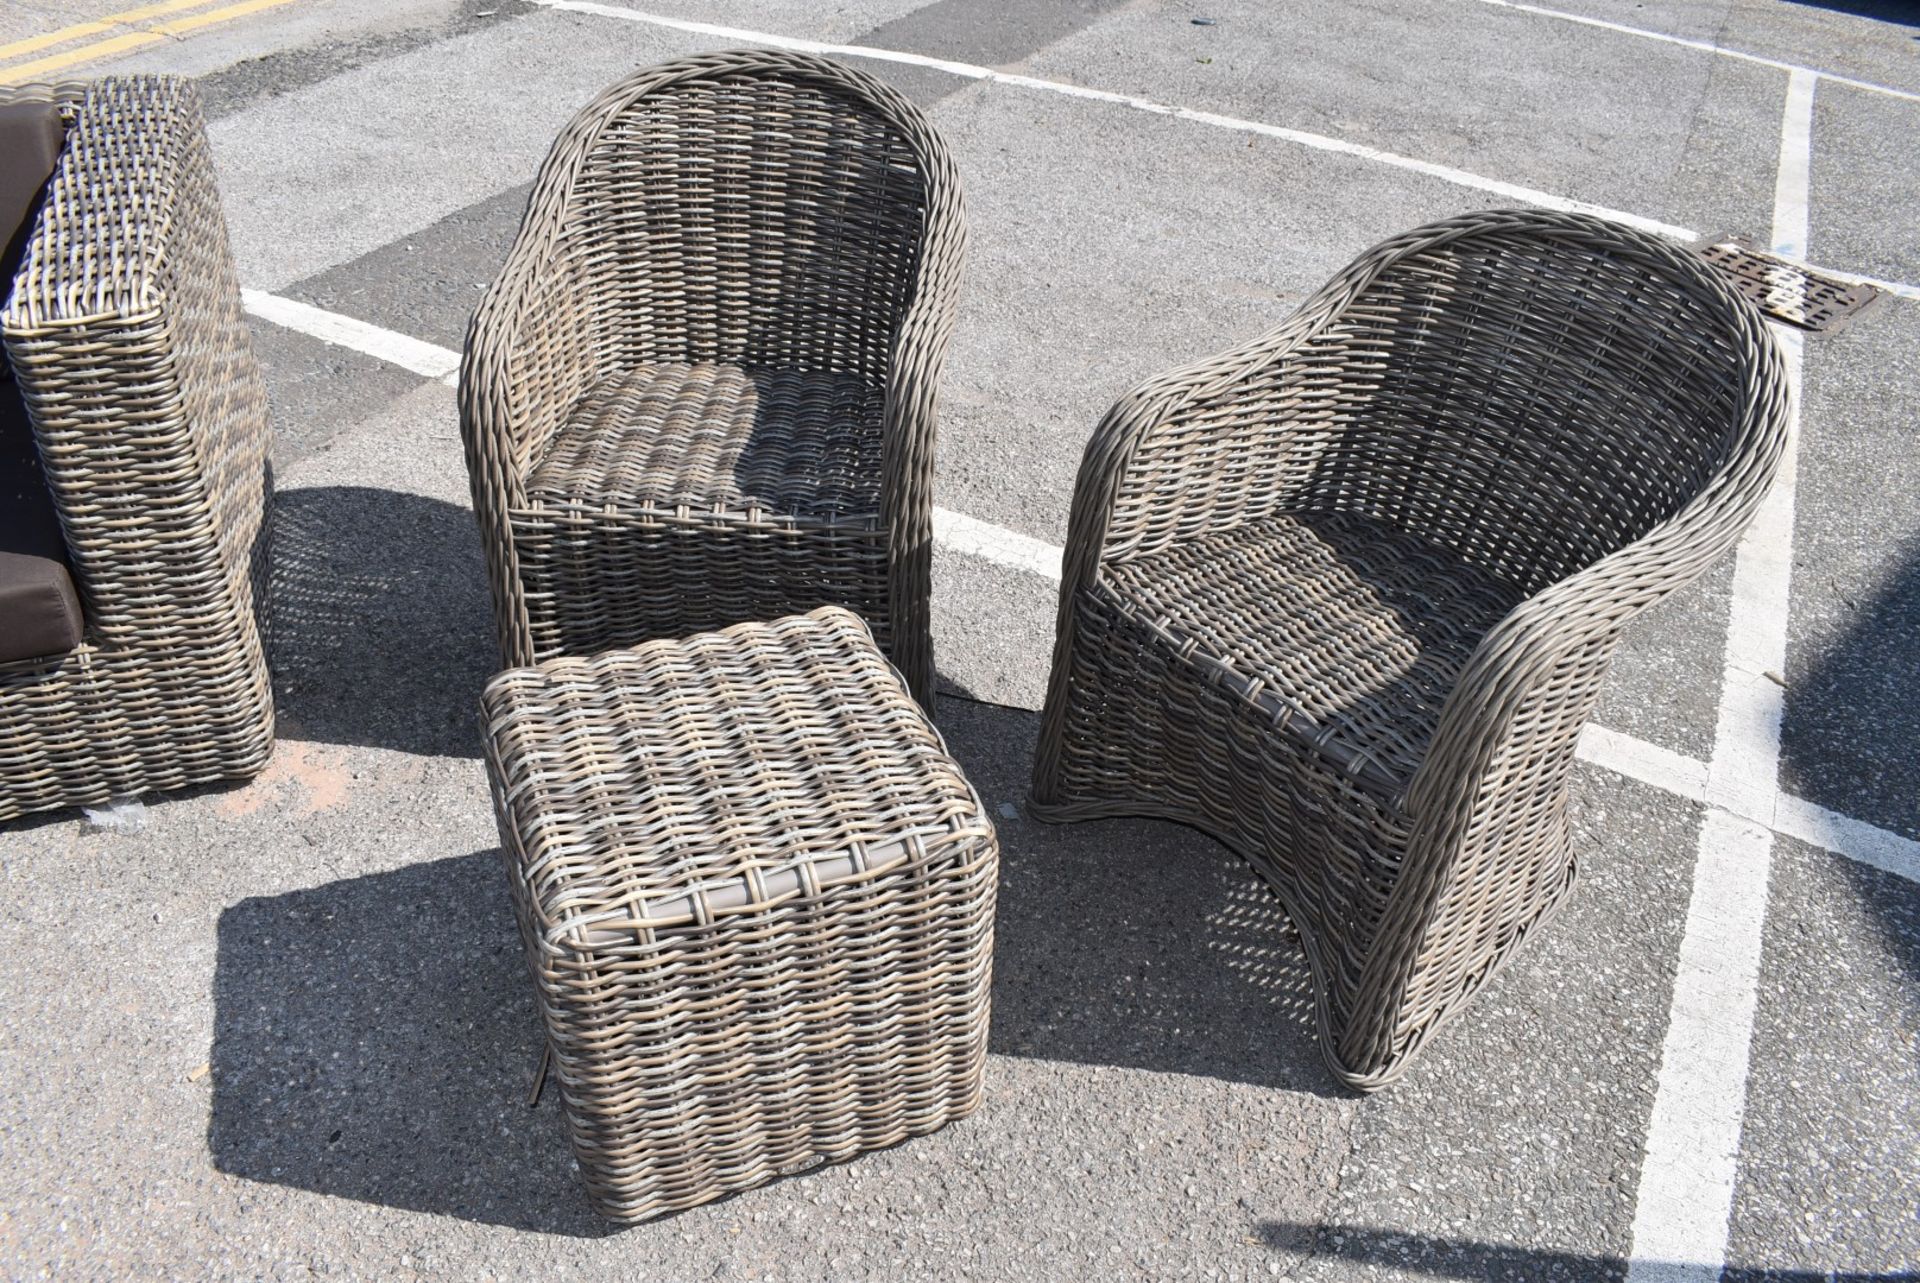 1 x Rattan Garden Furniture Set Including Sofa With Heated Seats, Two Chairs and Foot Stool - - Image 6 of 18